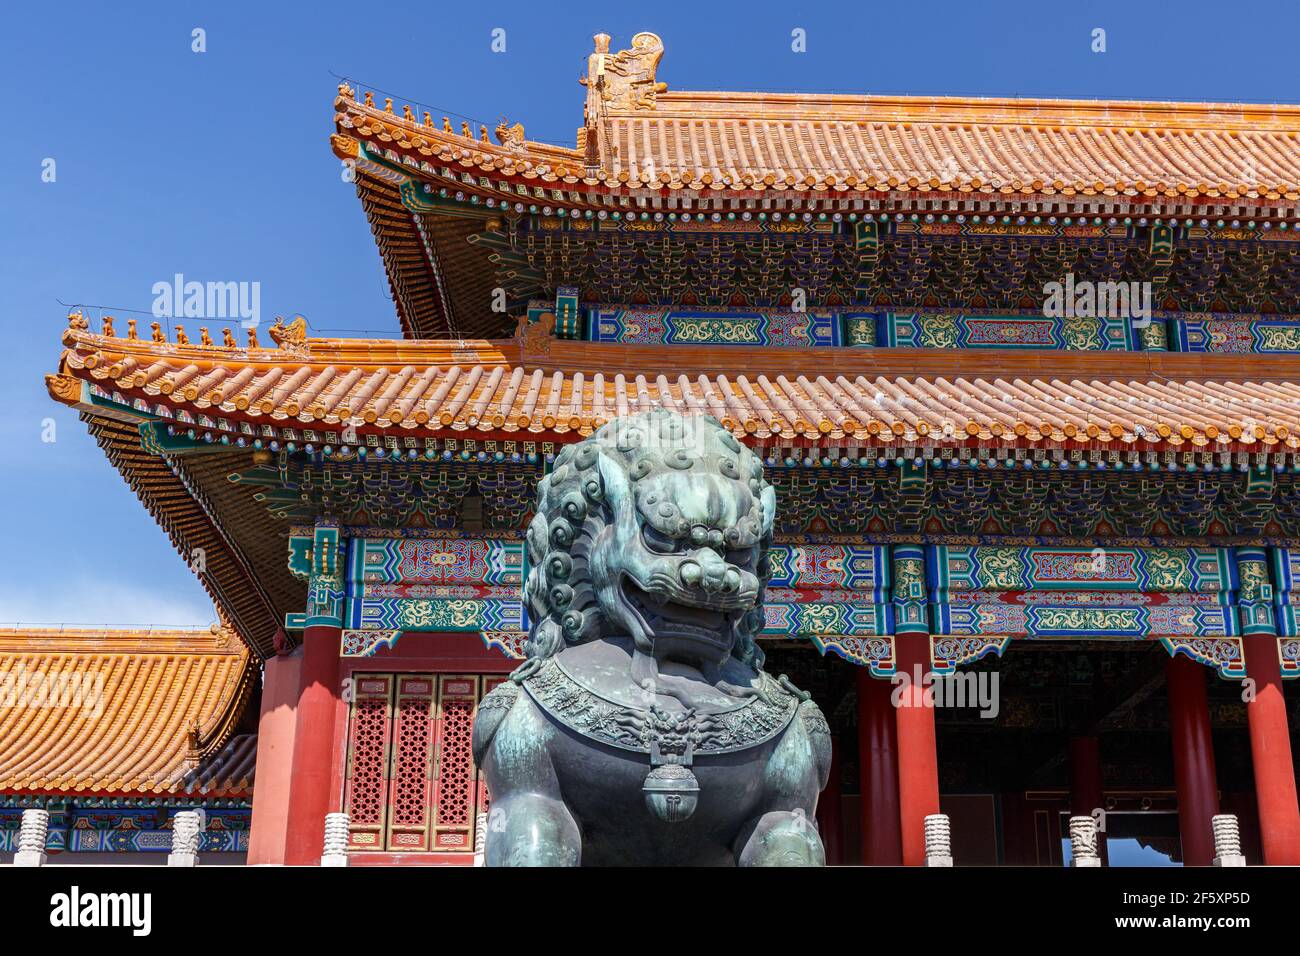 Ming-era Chinese imperial guardian lion bronze in front of a palace building at the Forbidden City in Beijing, China in March 2018. Stock Photo